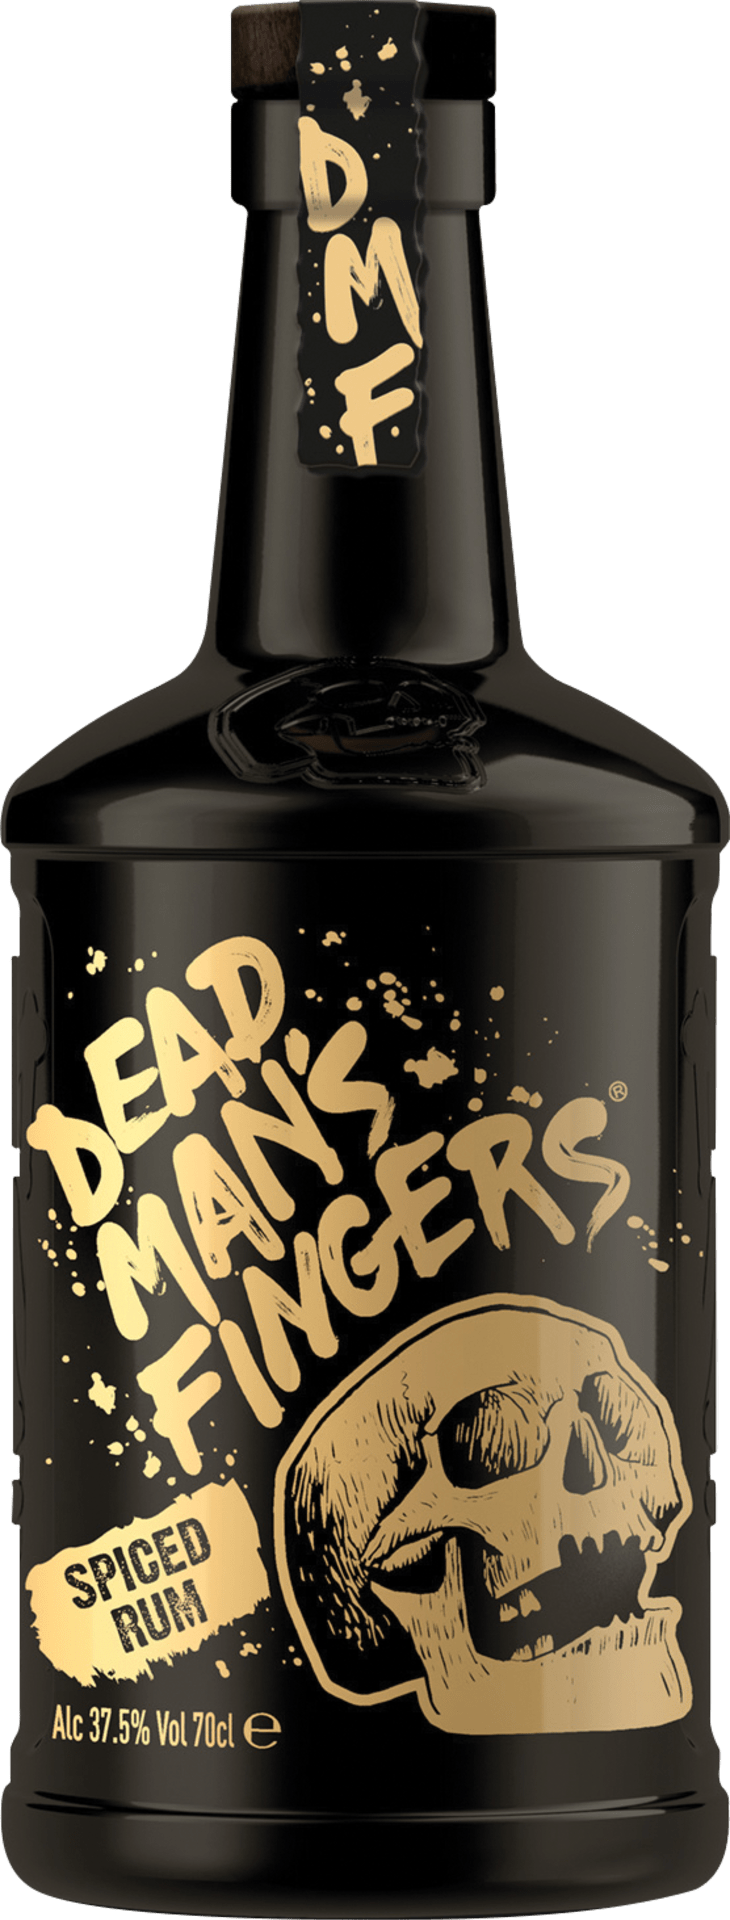 Dead Man’s Fingers Spiced Rum Halewood